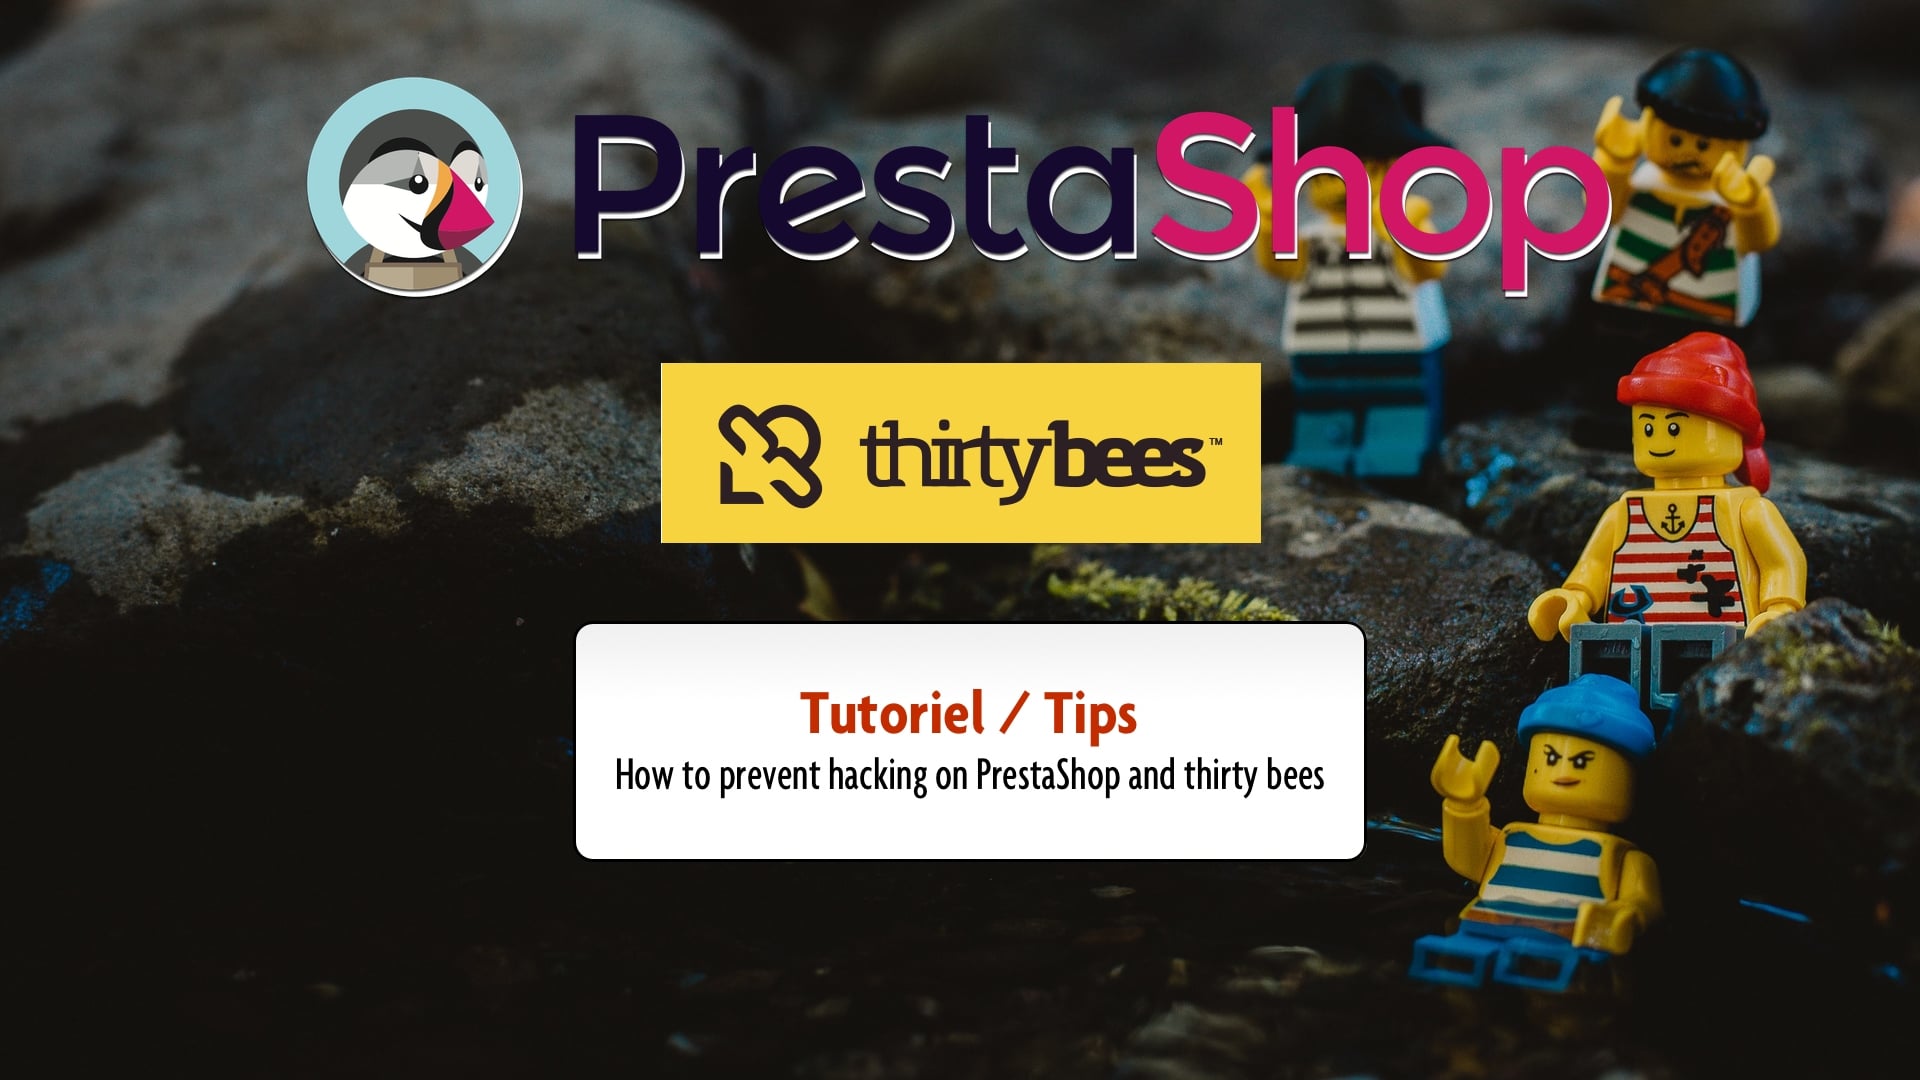 Tips to avoid having your PrestaShop / thirty bees store hacked